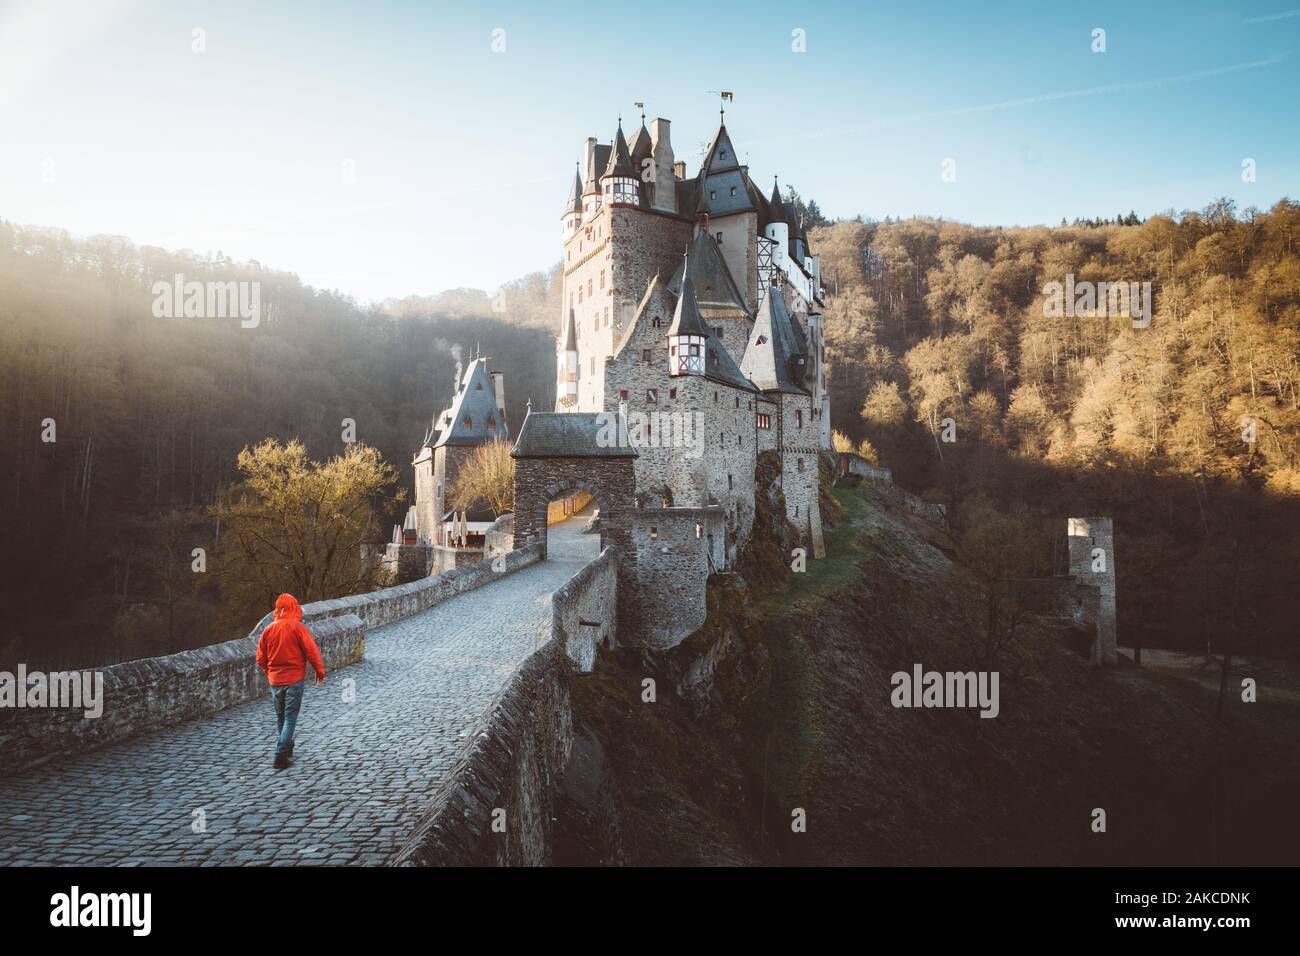 Panorama view of young explorer with backpack taking in the view at famous Eltz Castle at sunrise in fall, Rheinland-Pfalz, Germany Stock Photo